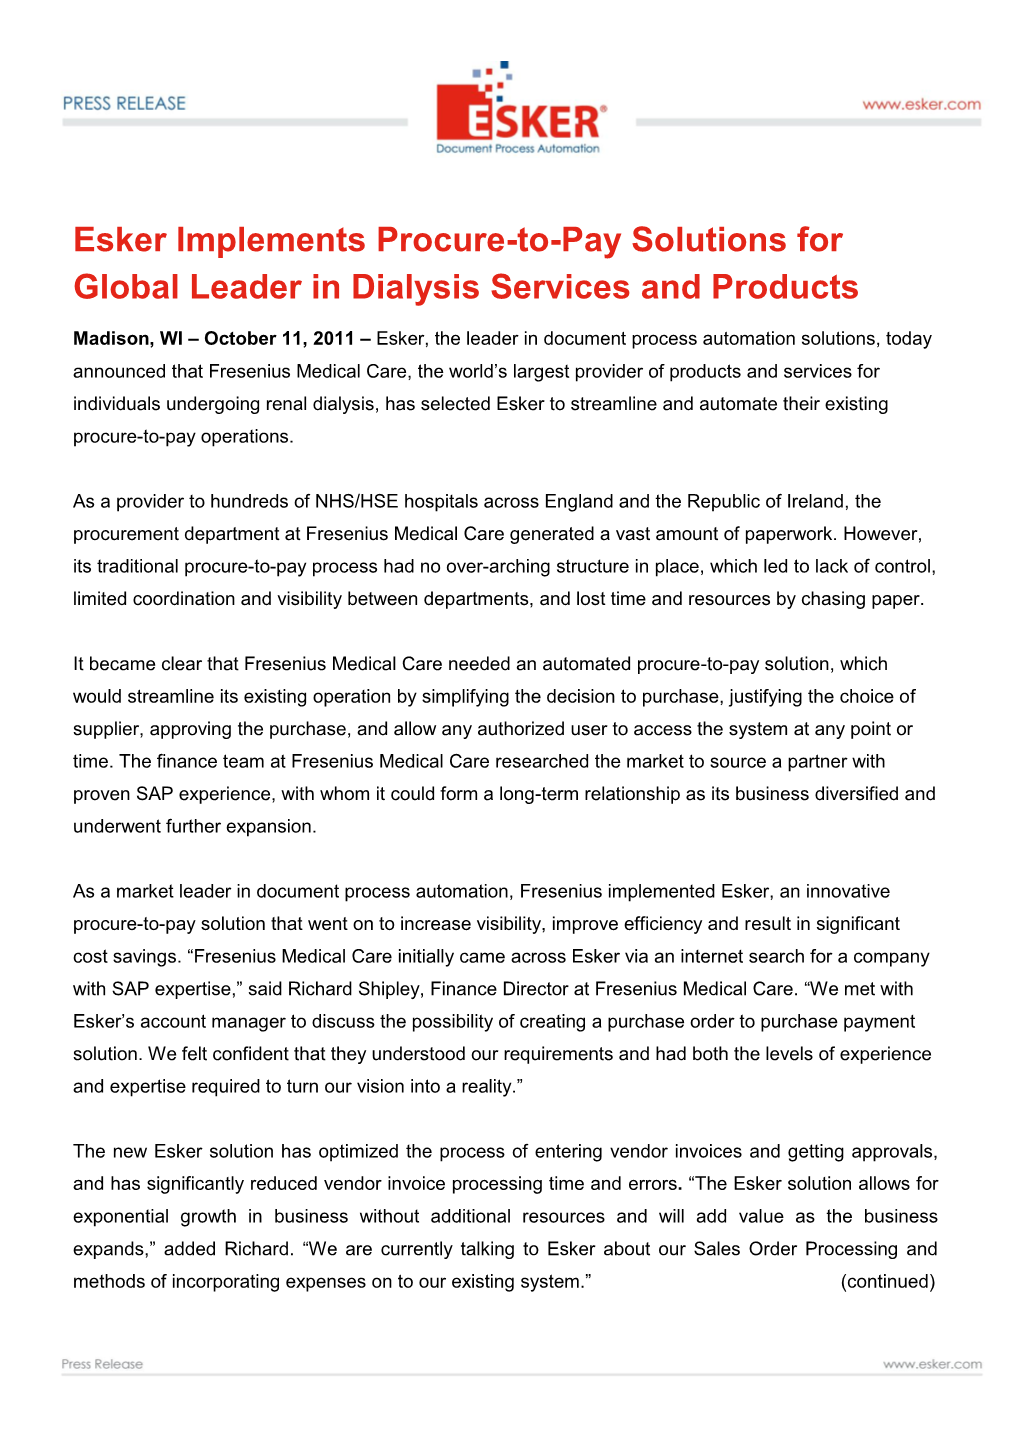 Esker Implements Procure-To-Pay Solutions for Global Leader in Dialysis Services and Products